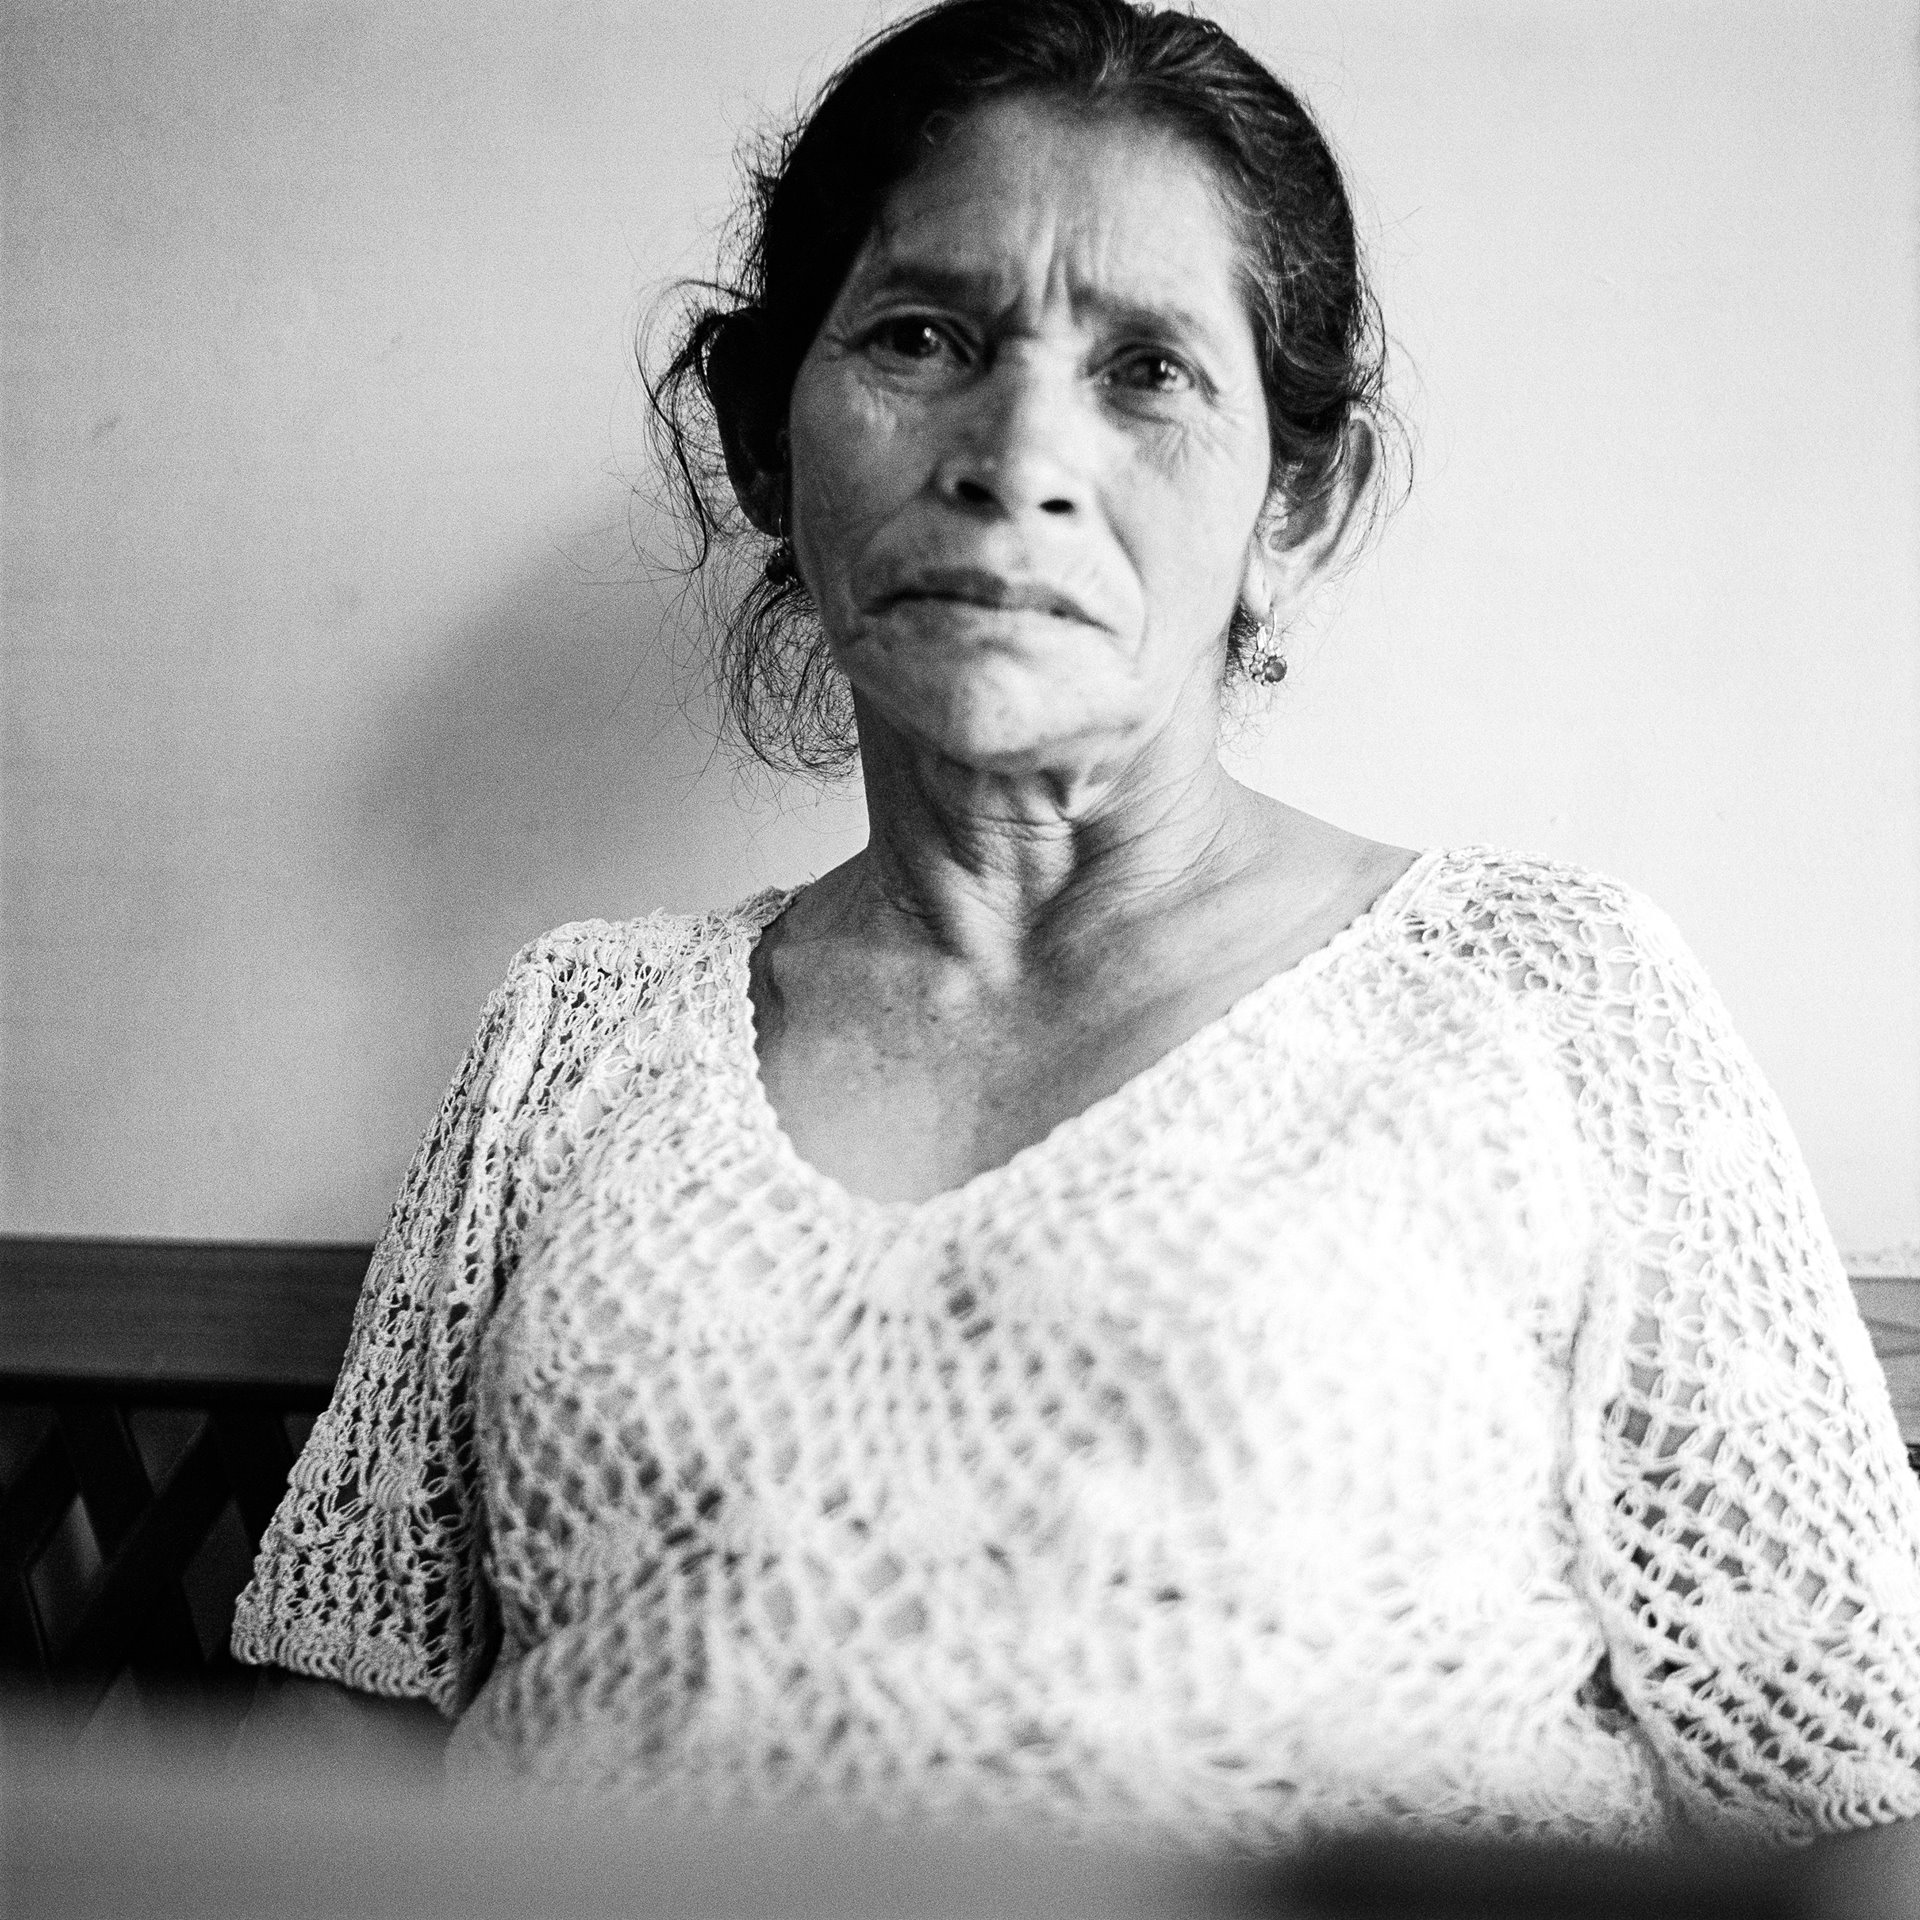 Doña Analigia wears a dress given to her by her son Roberto Antonio, before he was forcibly disappeared 16 years previously, at the age of 25. Doña Analigia and the association she belongs to, the Madres de la Candelaria, which assists people in tracing what has happened to the forcibly disappeared, say Roberto Antonio was tortured and killed by paramilitaries in the village of Toldas de Peque in Antioquia.